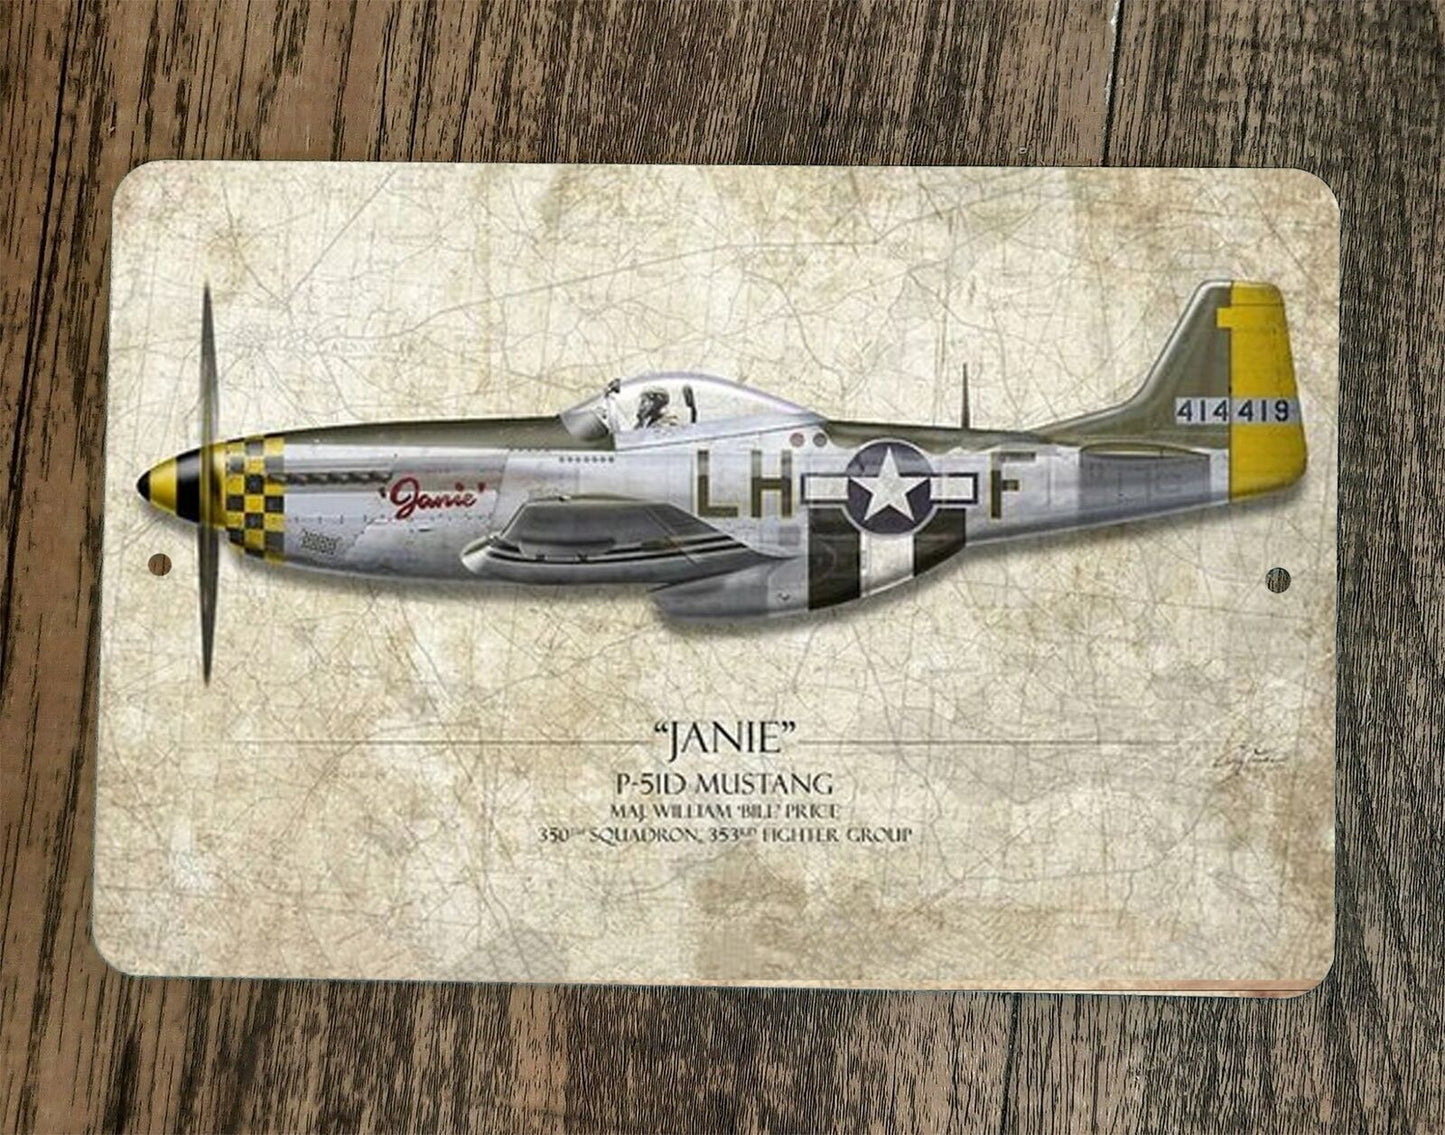 Janie P-51D Mustang Military Jet Plane 8x12 Metal Wall Sign Poster